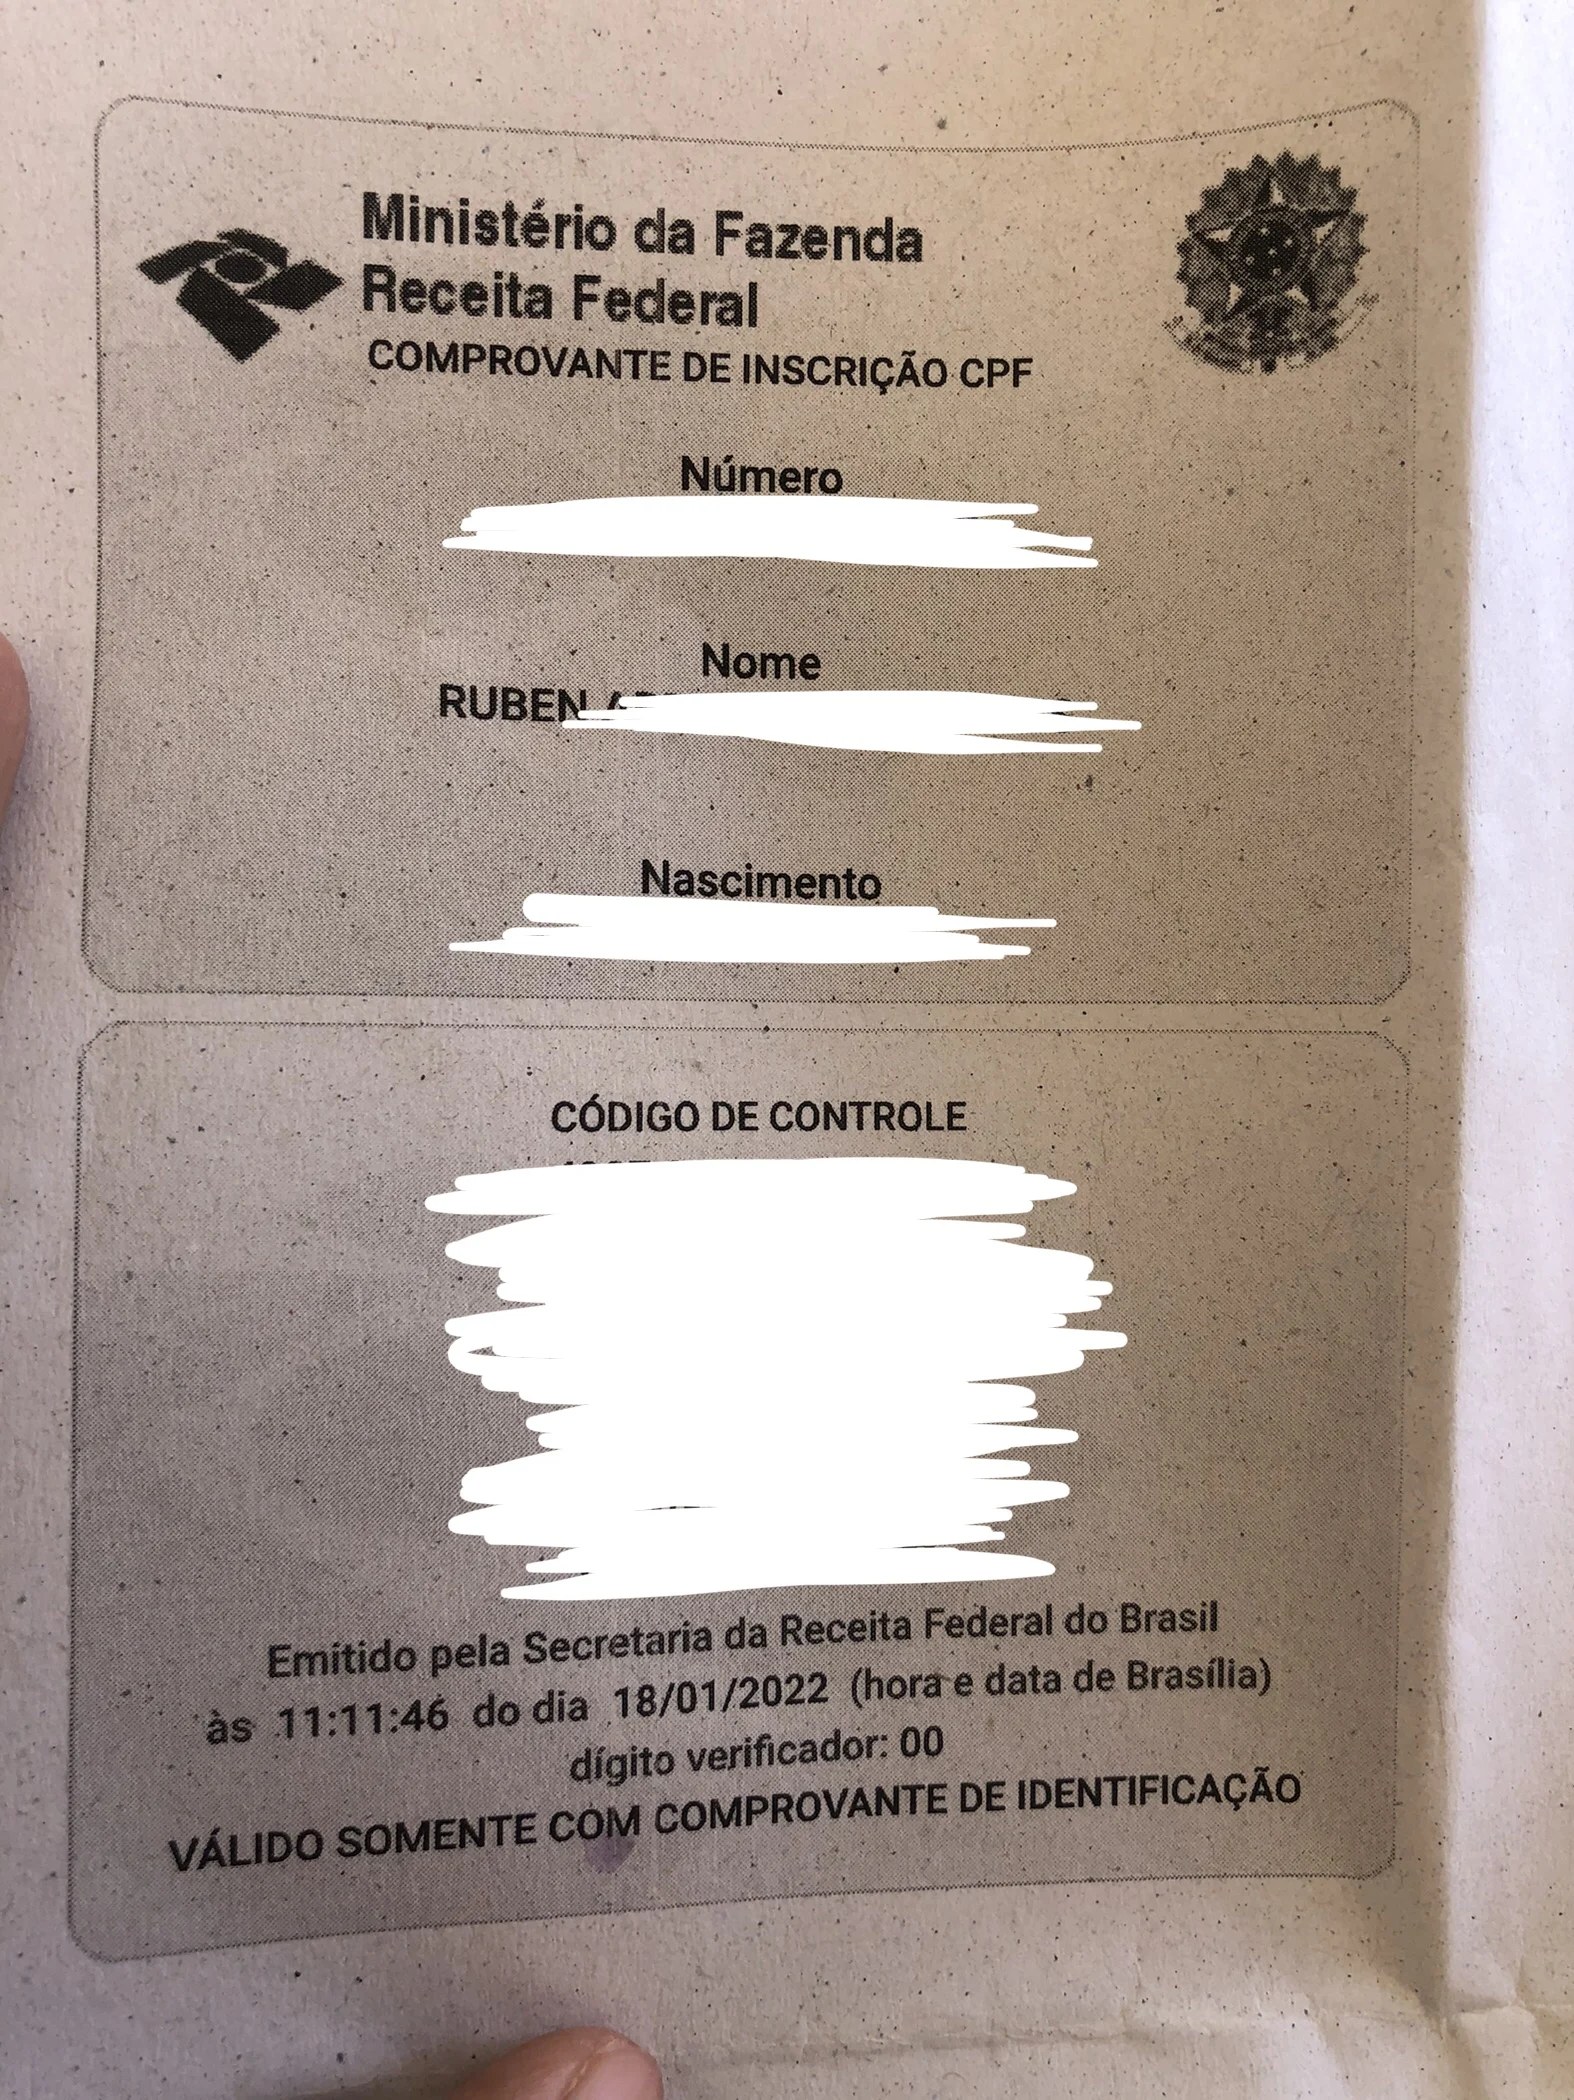 CPF Brazil for foreigners, cpf for foreigners Brazil, how to get a CPF in Brazil for tourist, CPF for tourists in Brazil, CPF Application form tourists